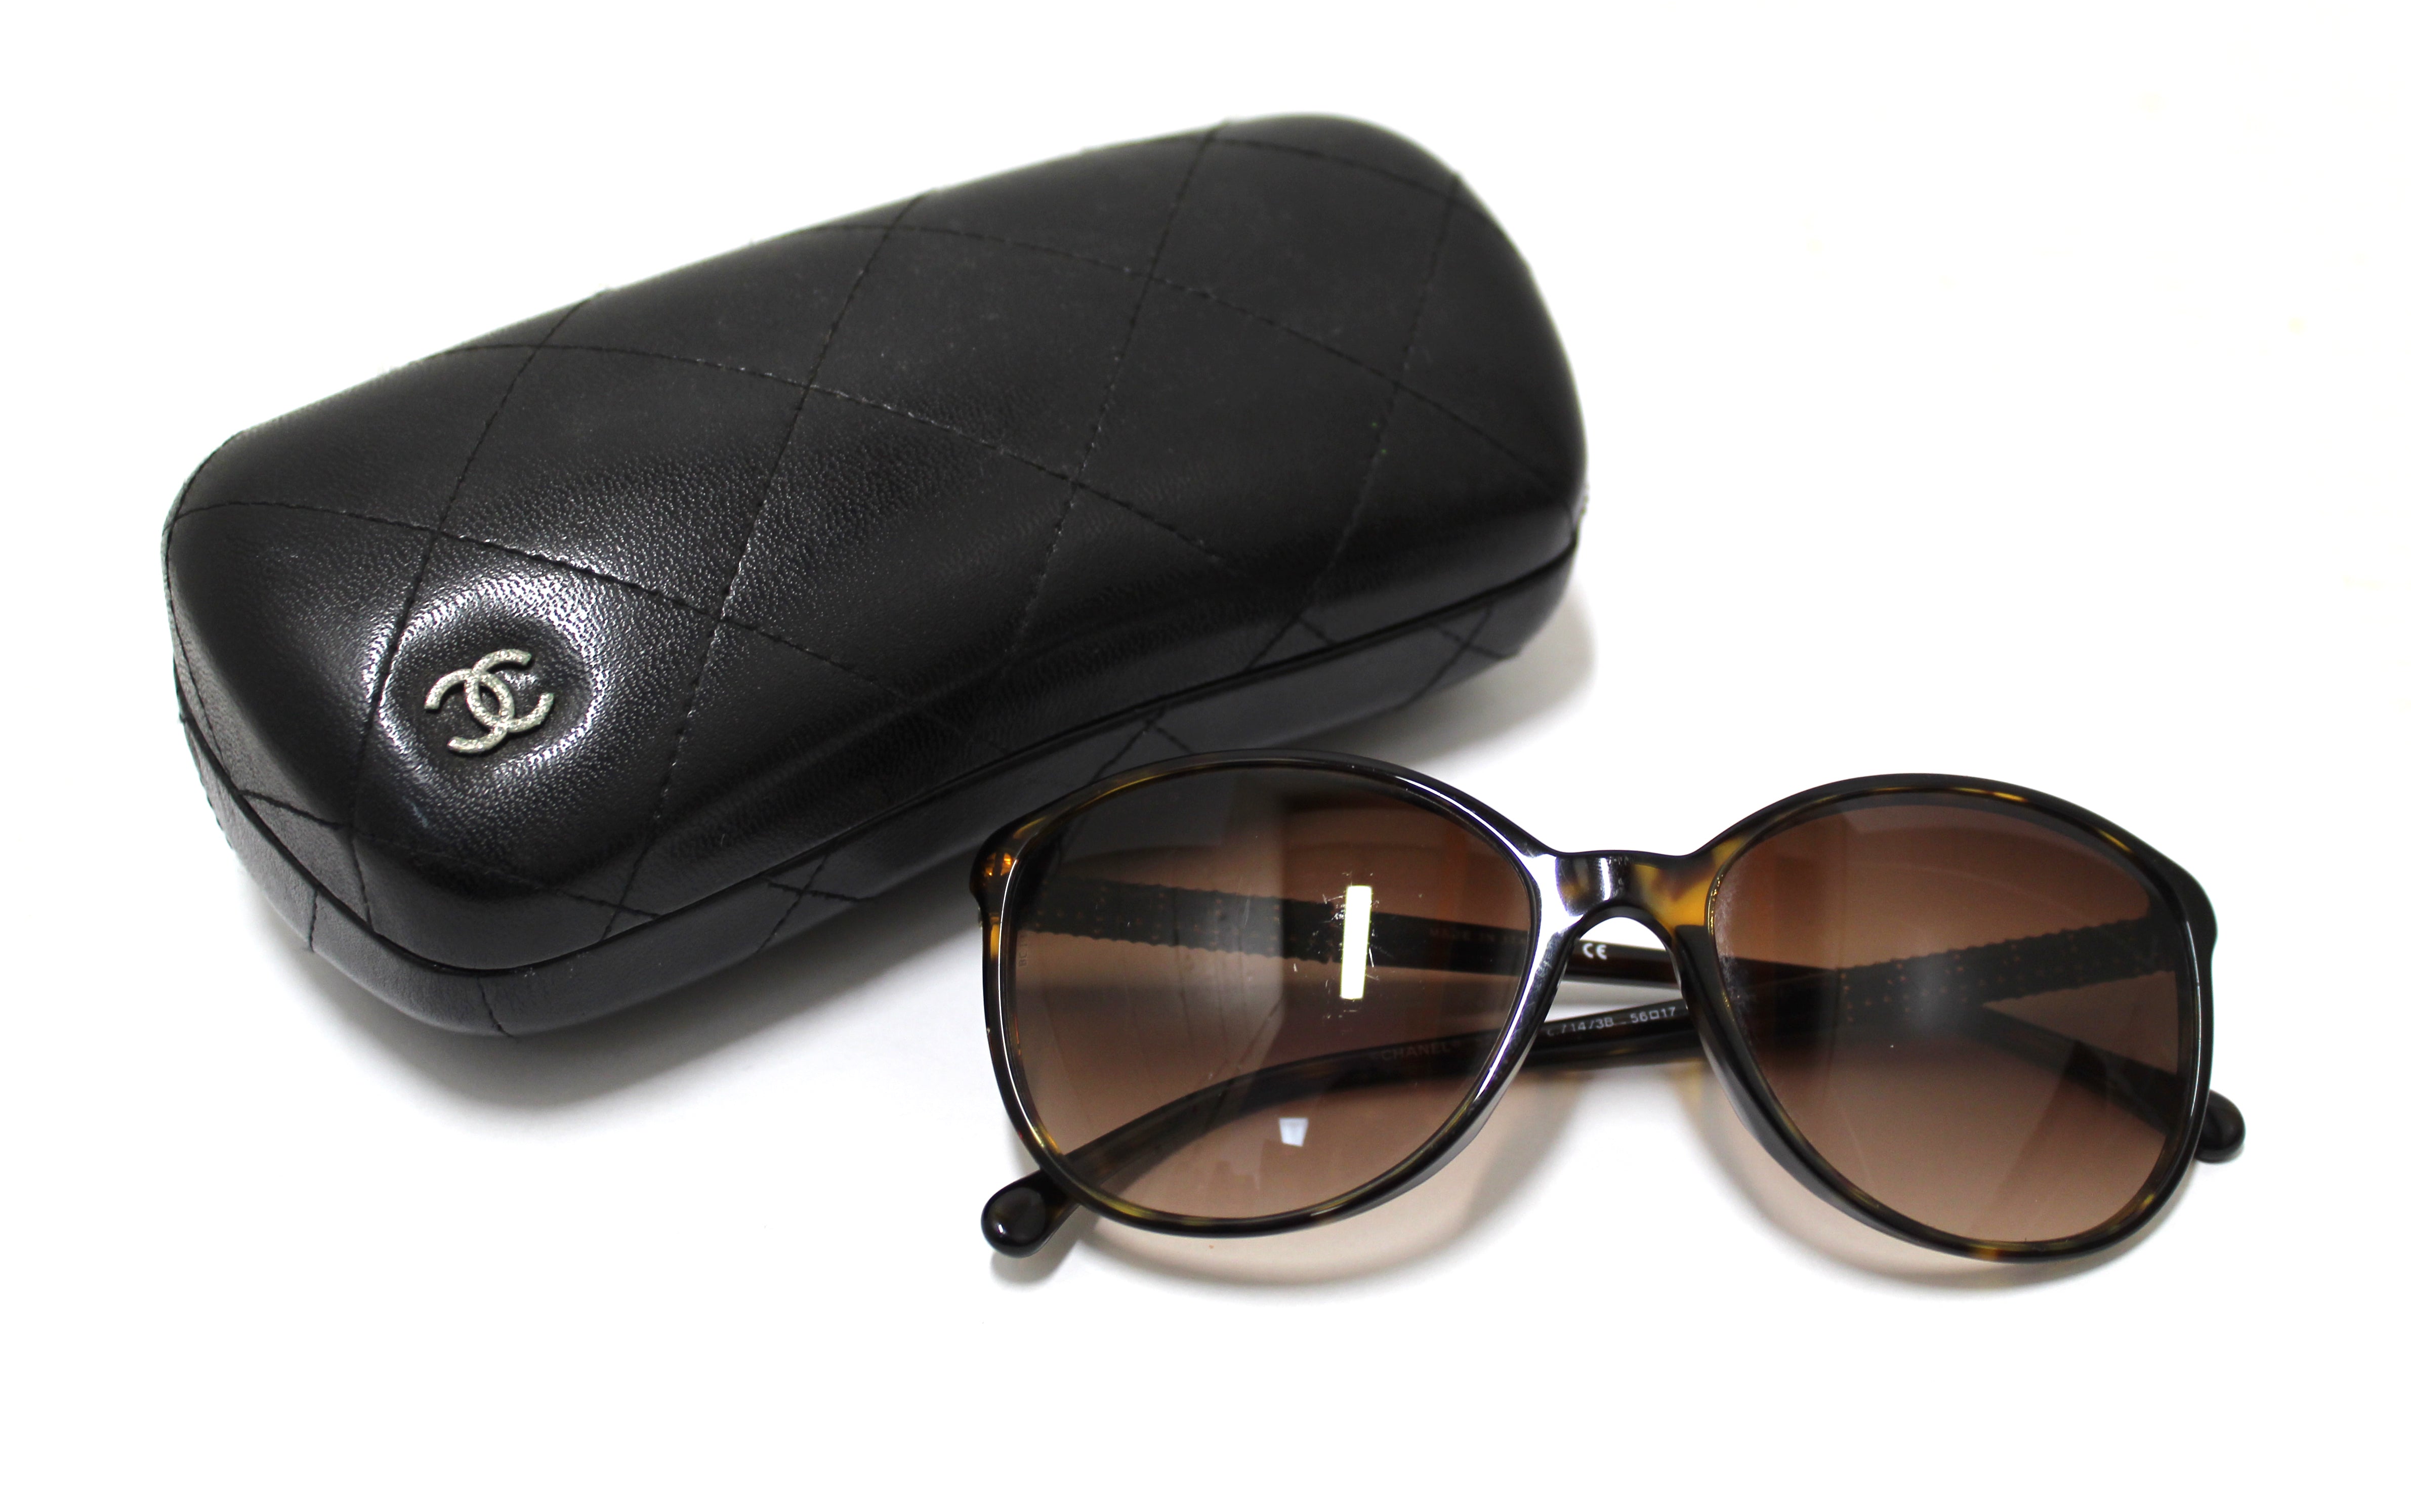 Authentic Chanel tortoise shell sunglasses 5207-A